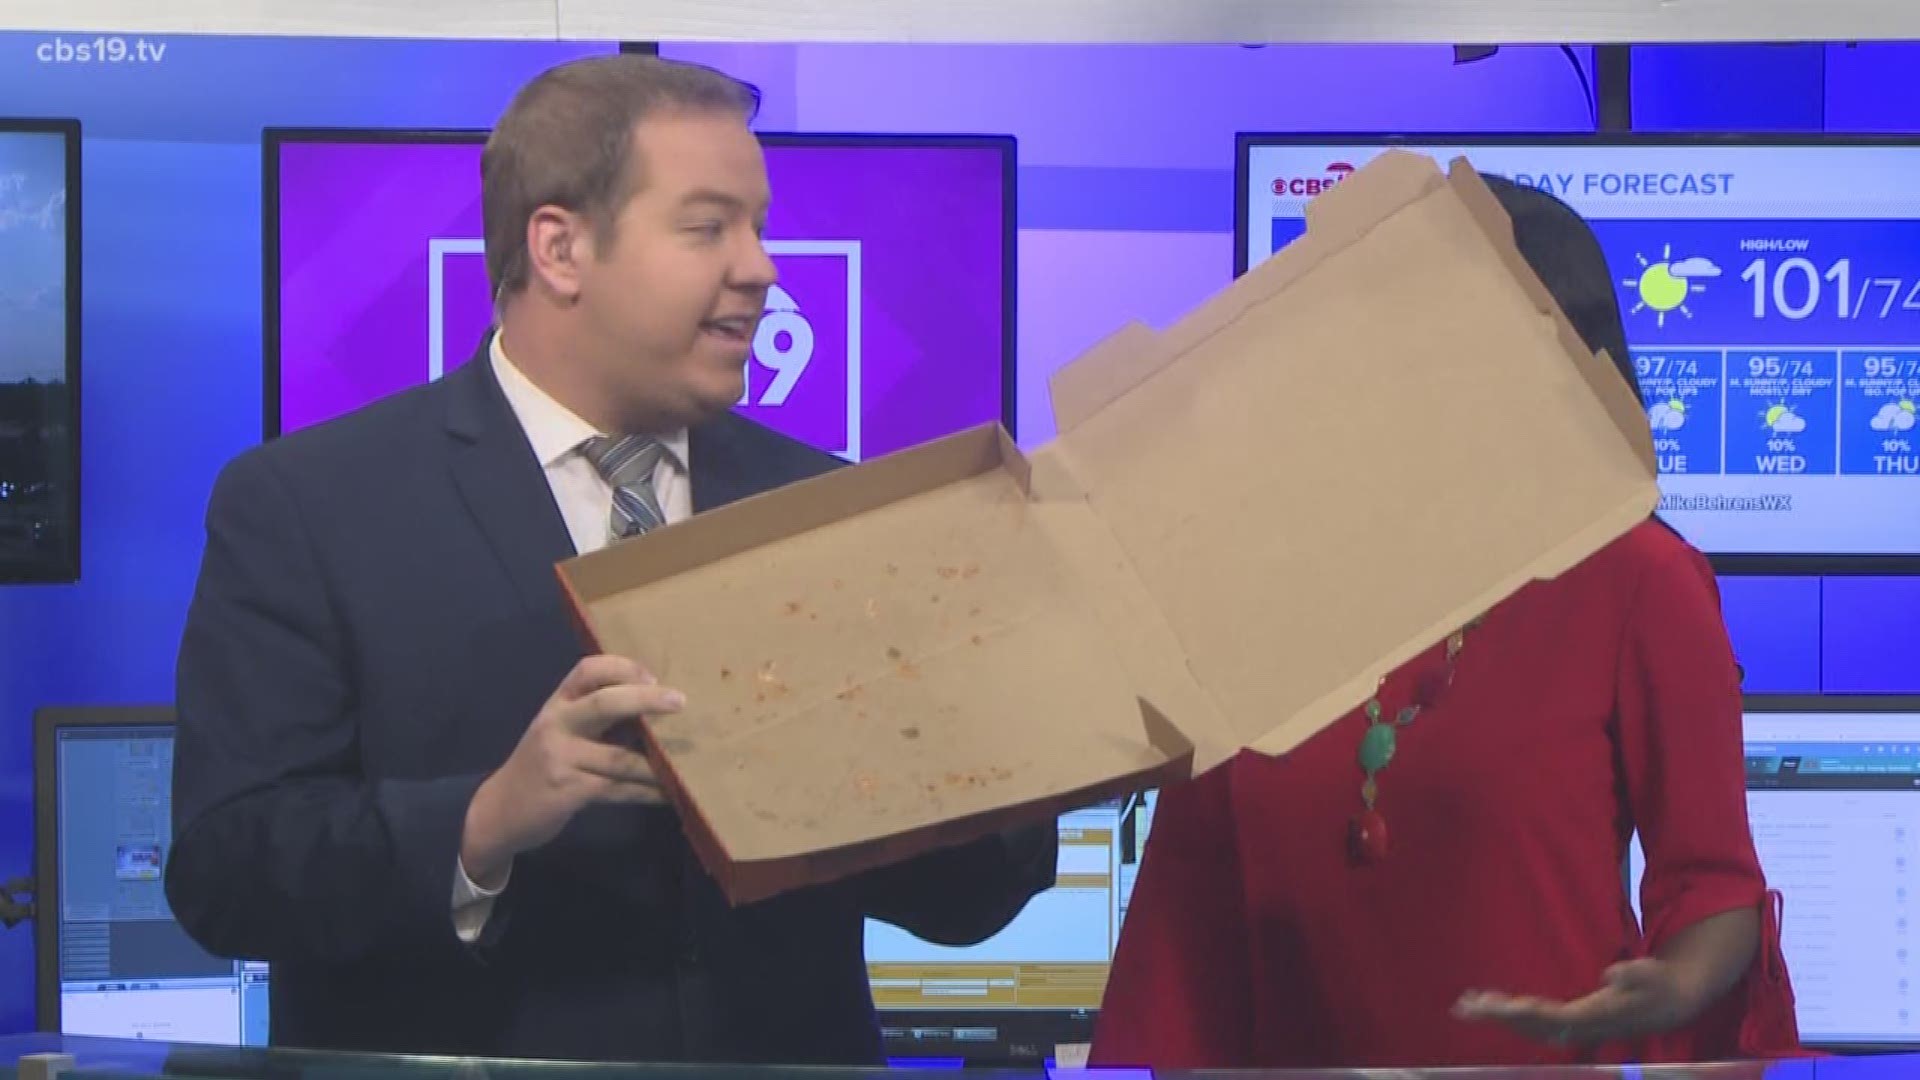 It's Cheese Pizza day and they didn't leave anything left for Meteorologist Michael Behrens. :(